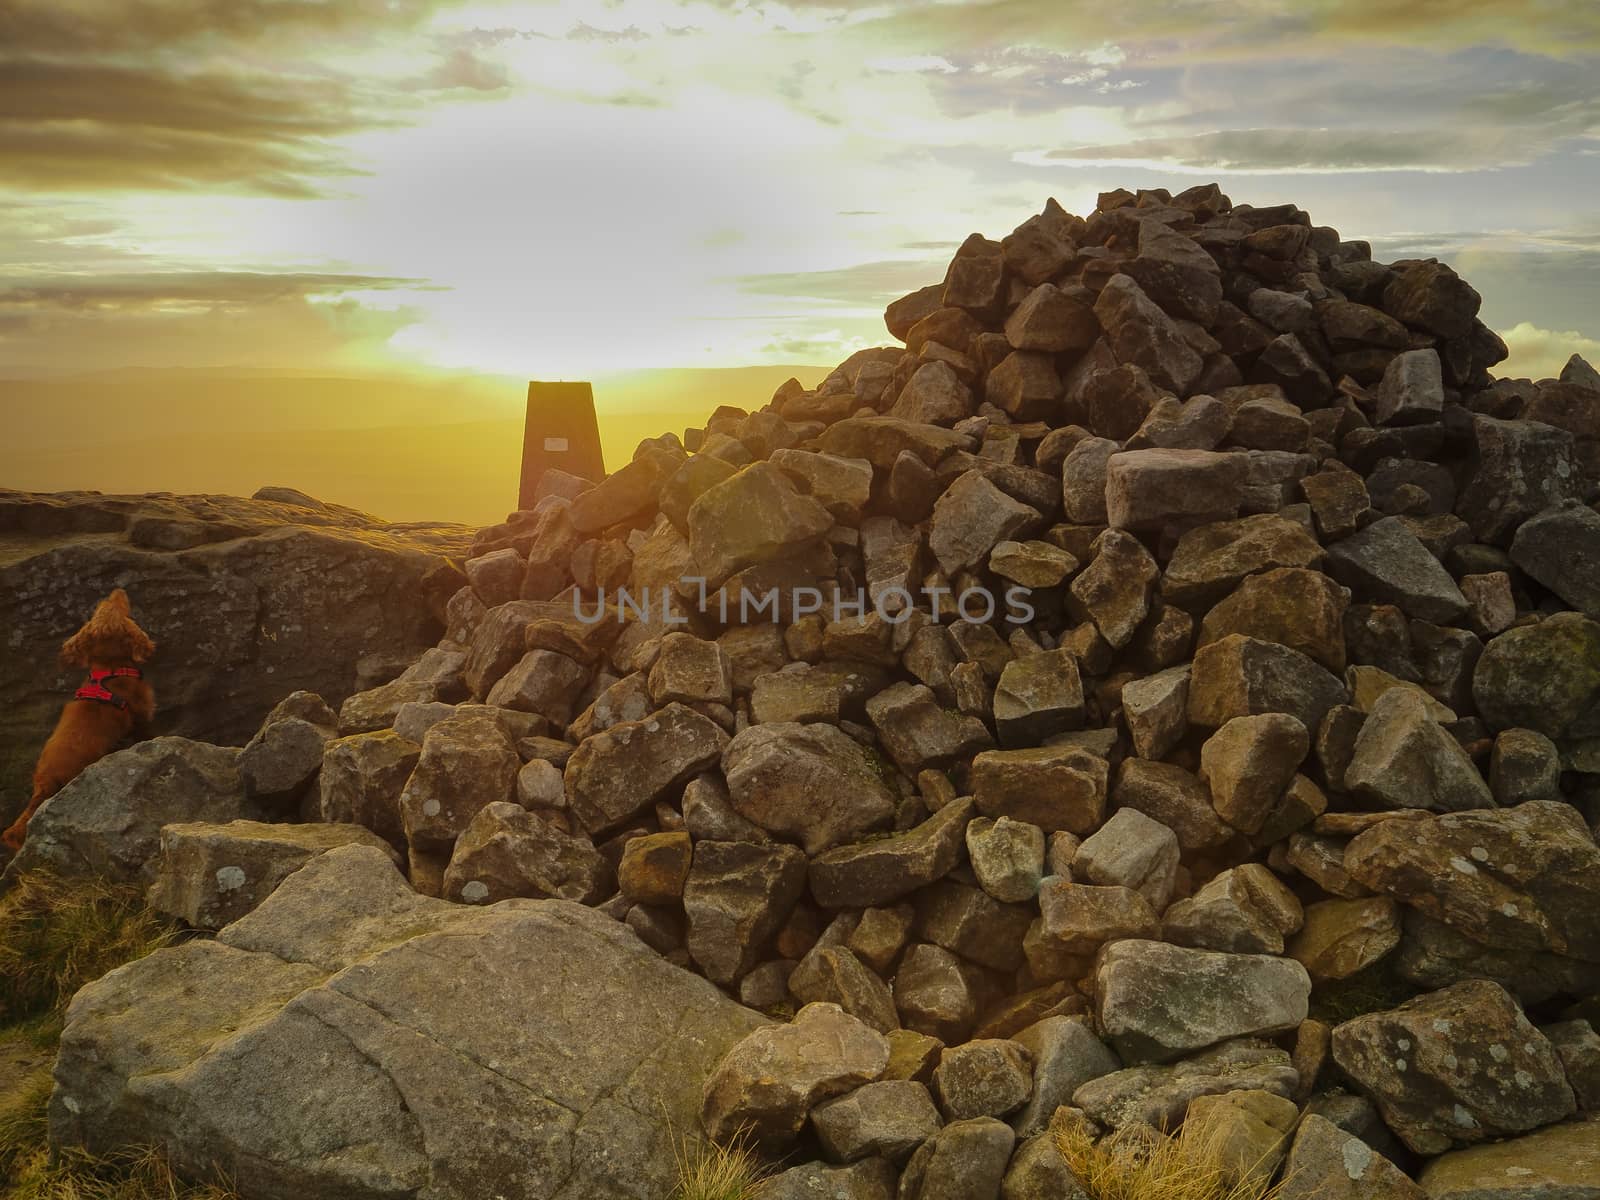 Stunning sunset with dog looking on over the trig point and cairn at the rocky outcrop at the top of Great Whernside overlooking Wharfedale, Yorkshire Dales, UK